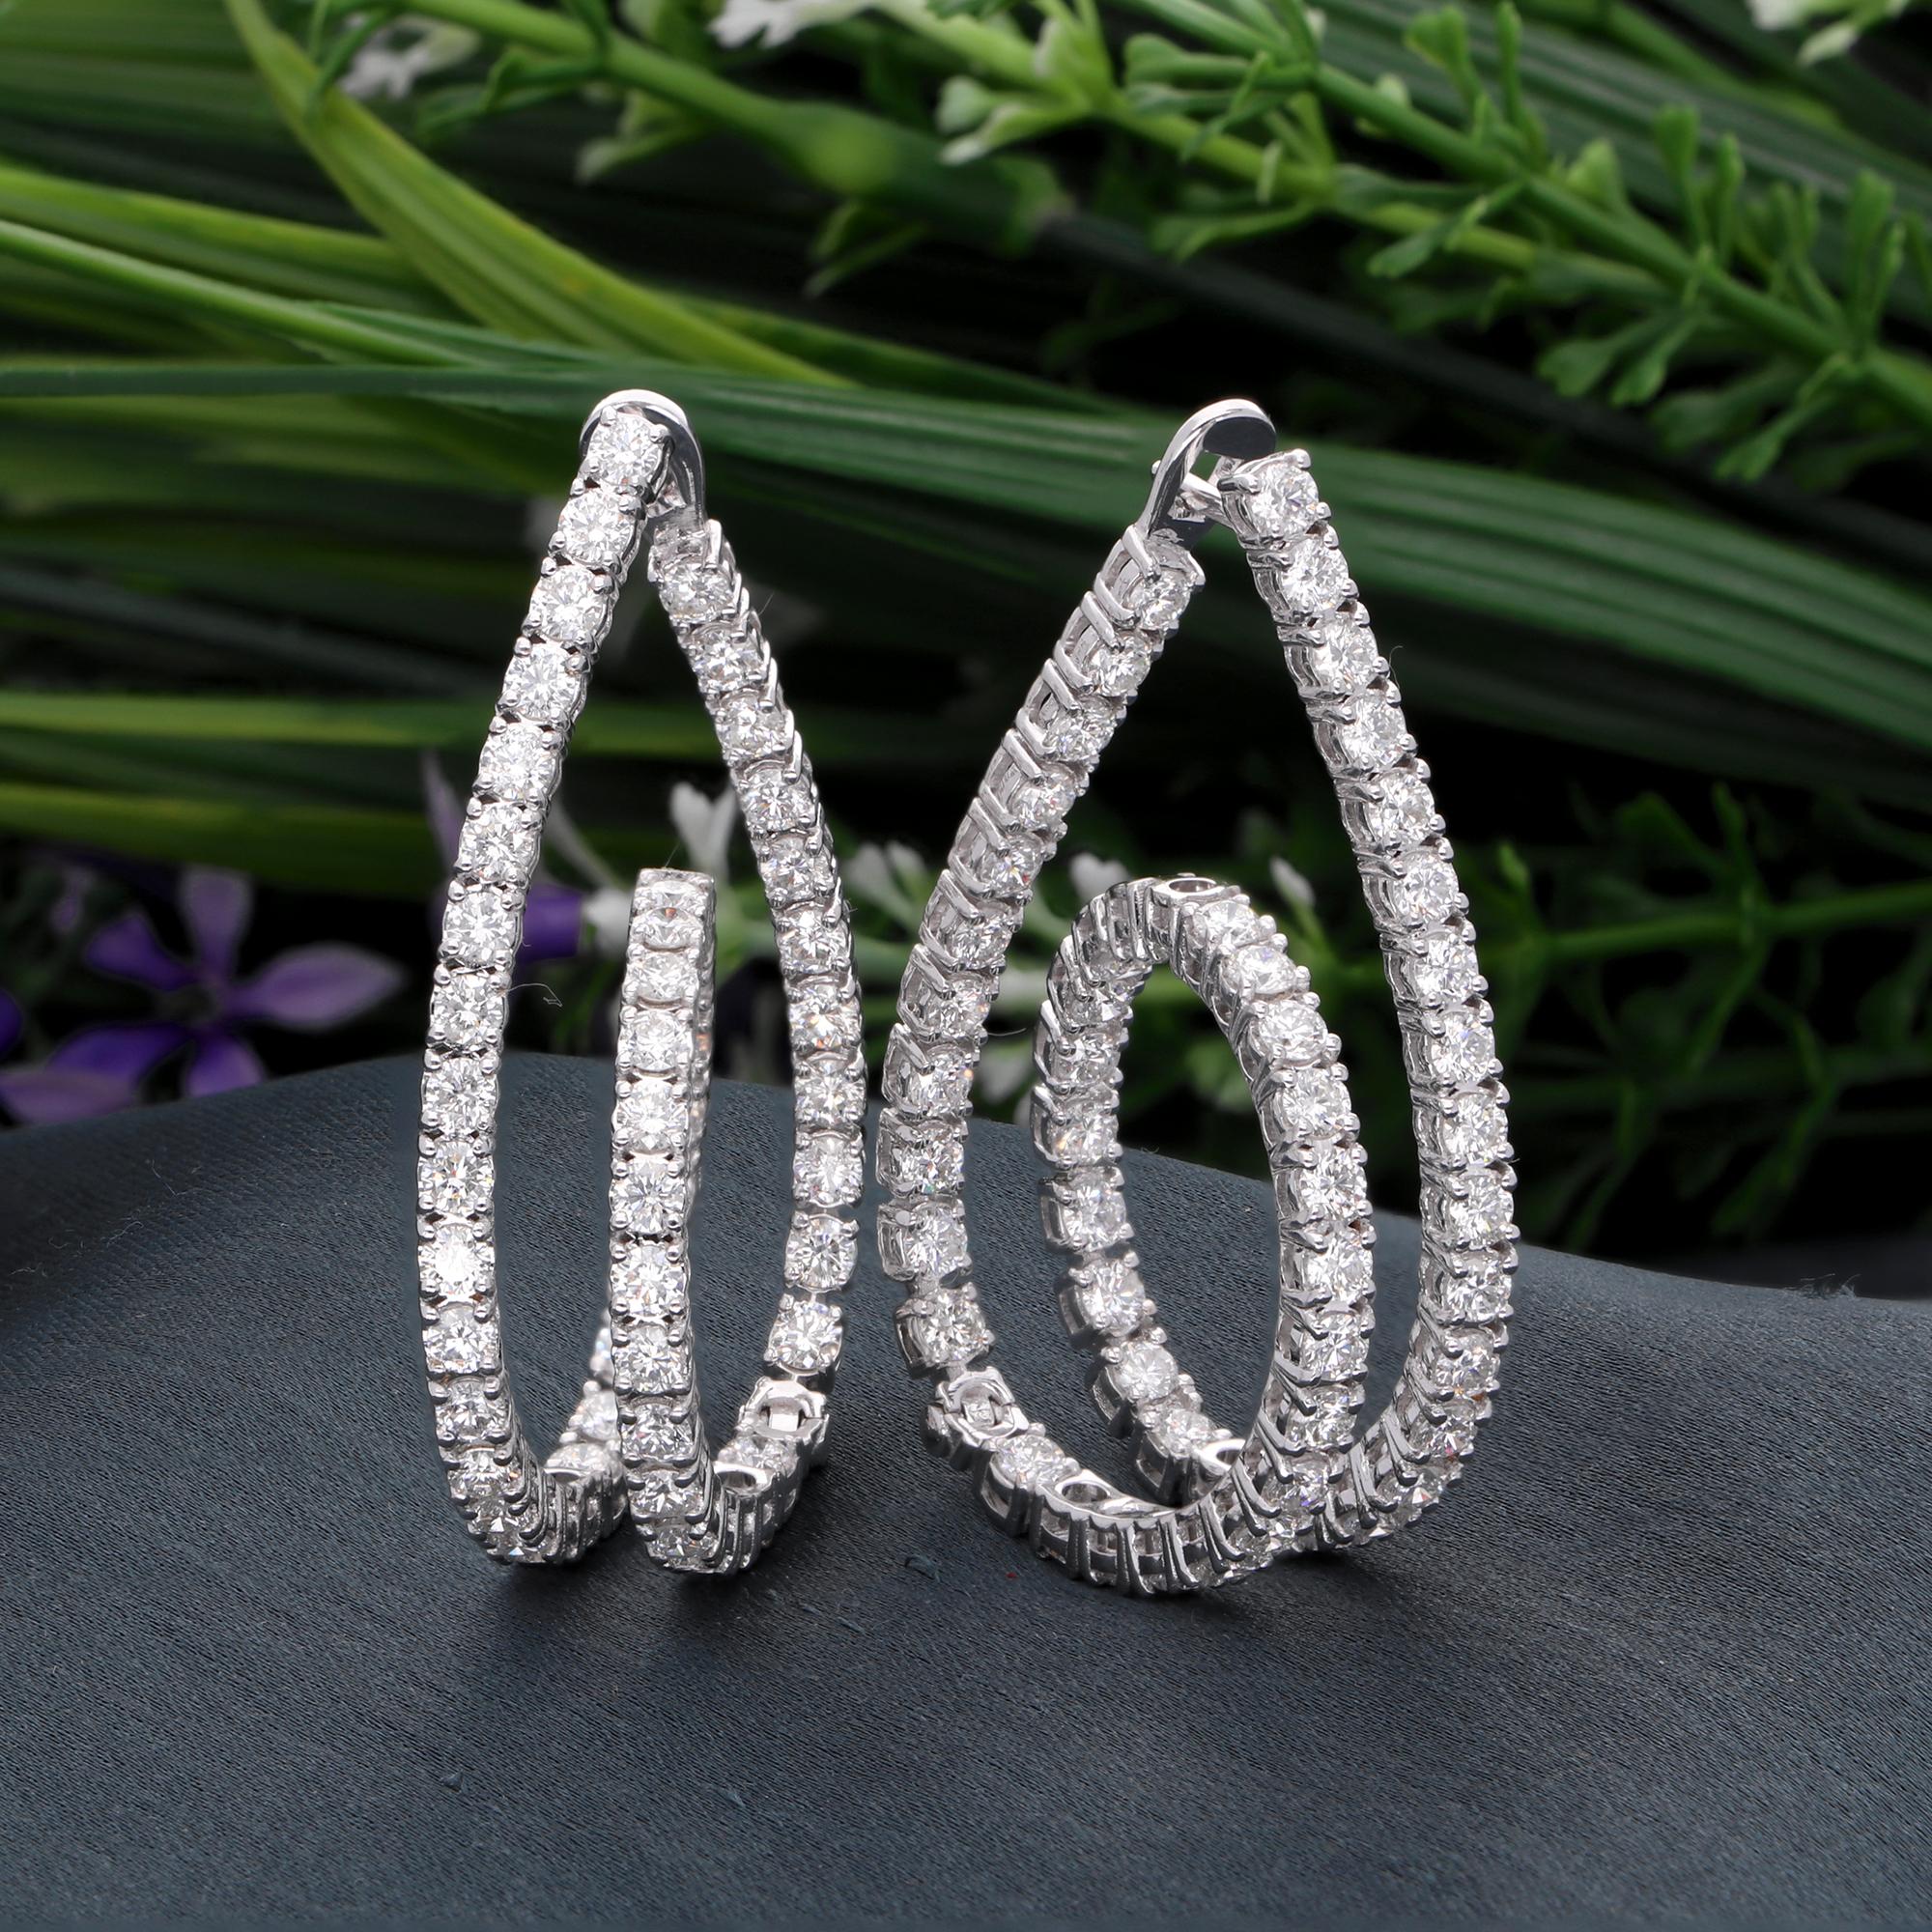 These Diamond Huggie Earrings with 6.22 ct. Genuine Diamonds are a promise of perfection and purity. These hoops are set in 18k Solid White Gold. You can choose these earrings in 10k/14k/18k, Rose Gold/White Gold/Yellow Gold.

These are perfect Gift